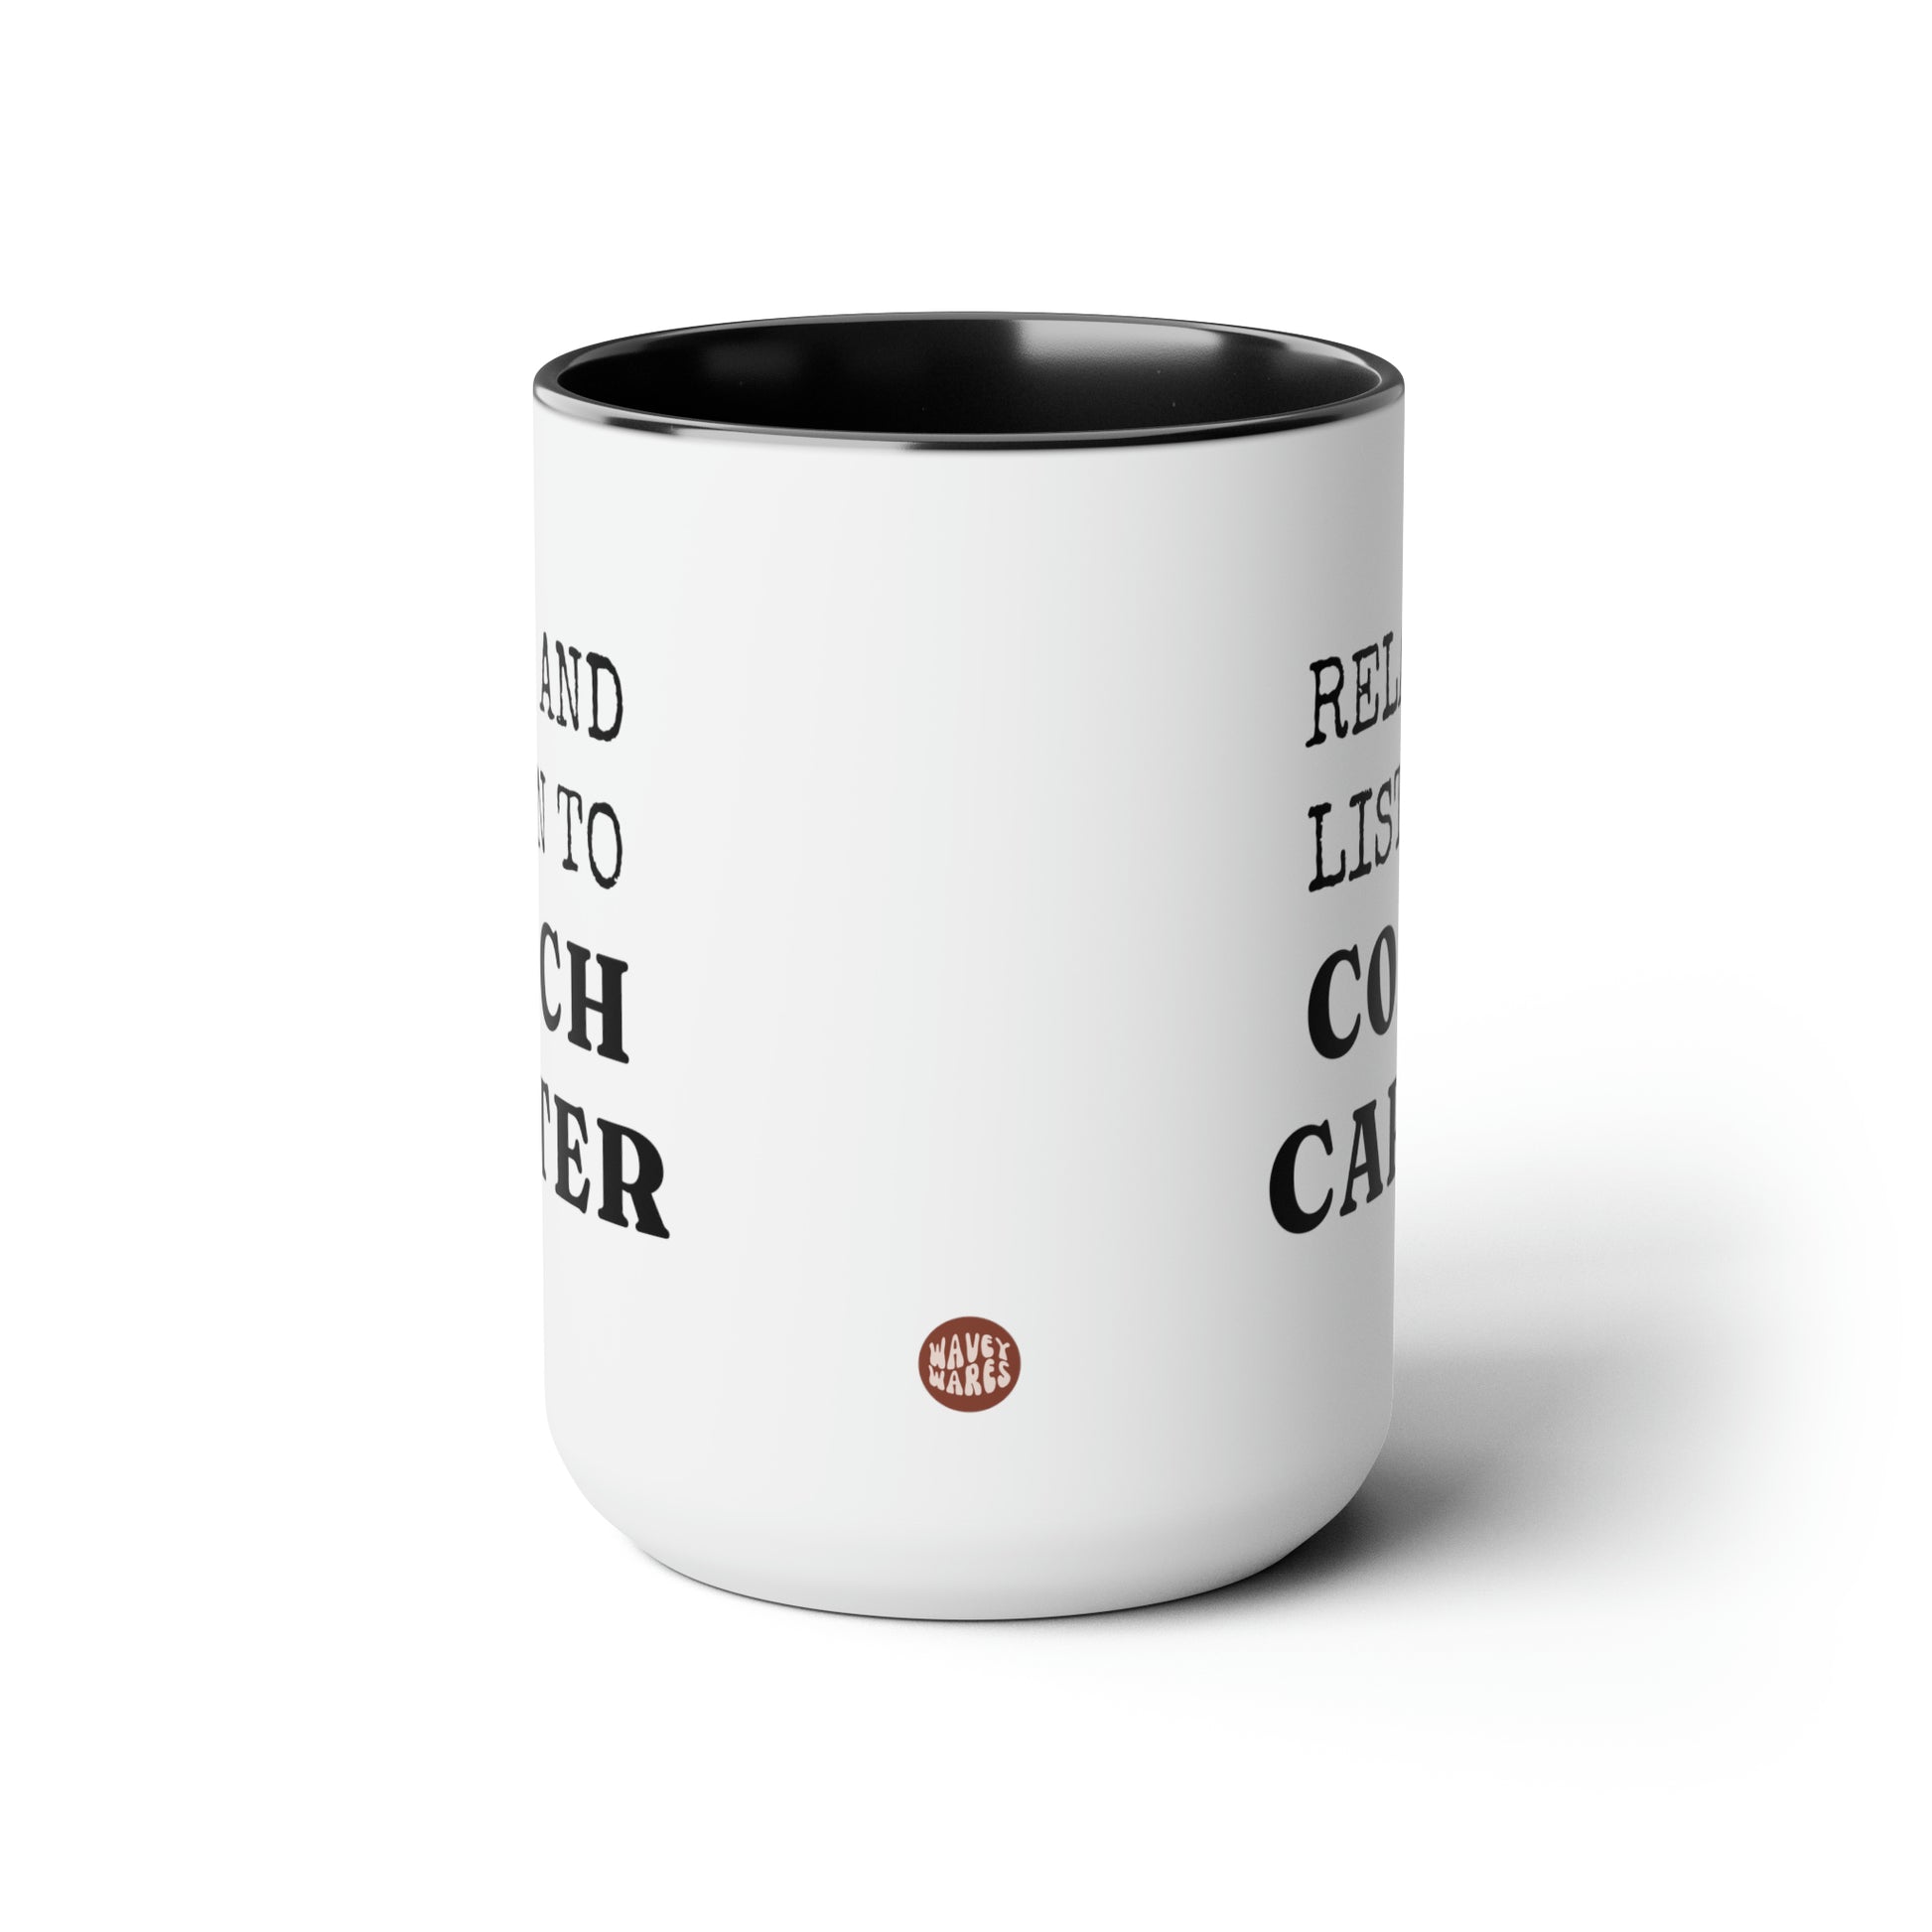 Relax And Listen To Coach 15oz white with black accent funny large coffee mug gift for  coaches thank you from players team custom personalized customize name  waveywares wavey wares wavywares wavy wares side